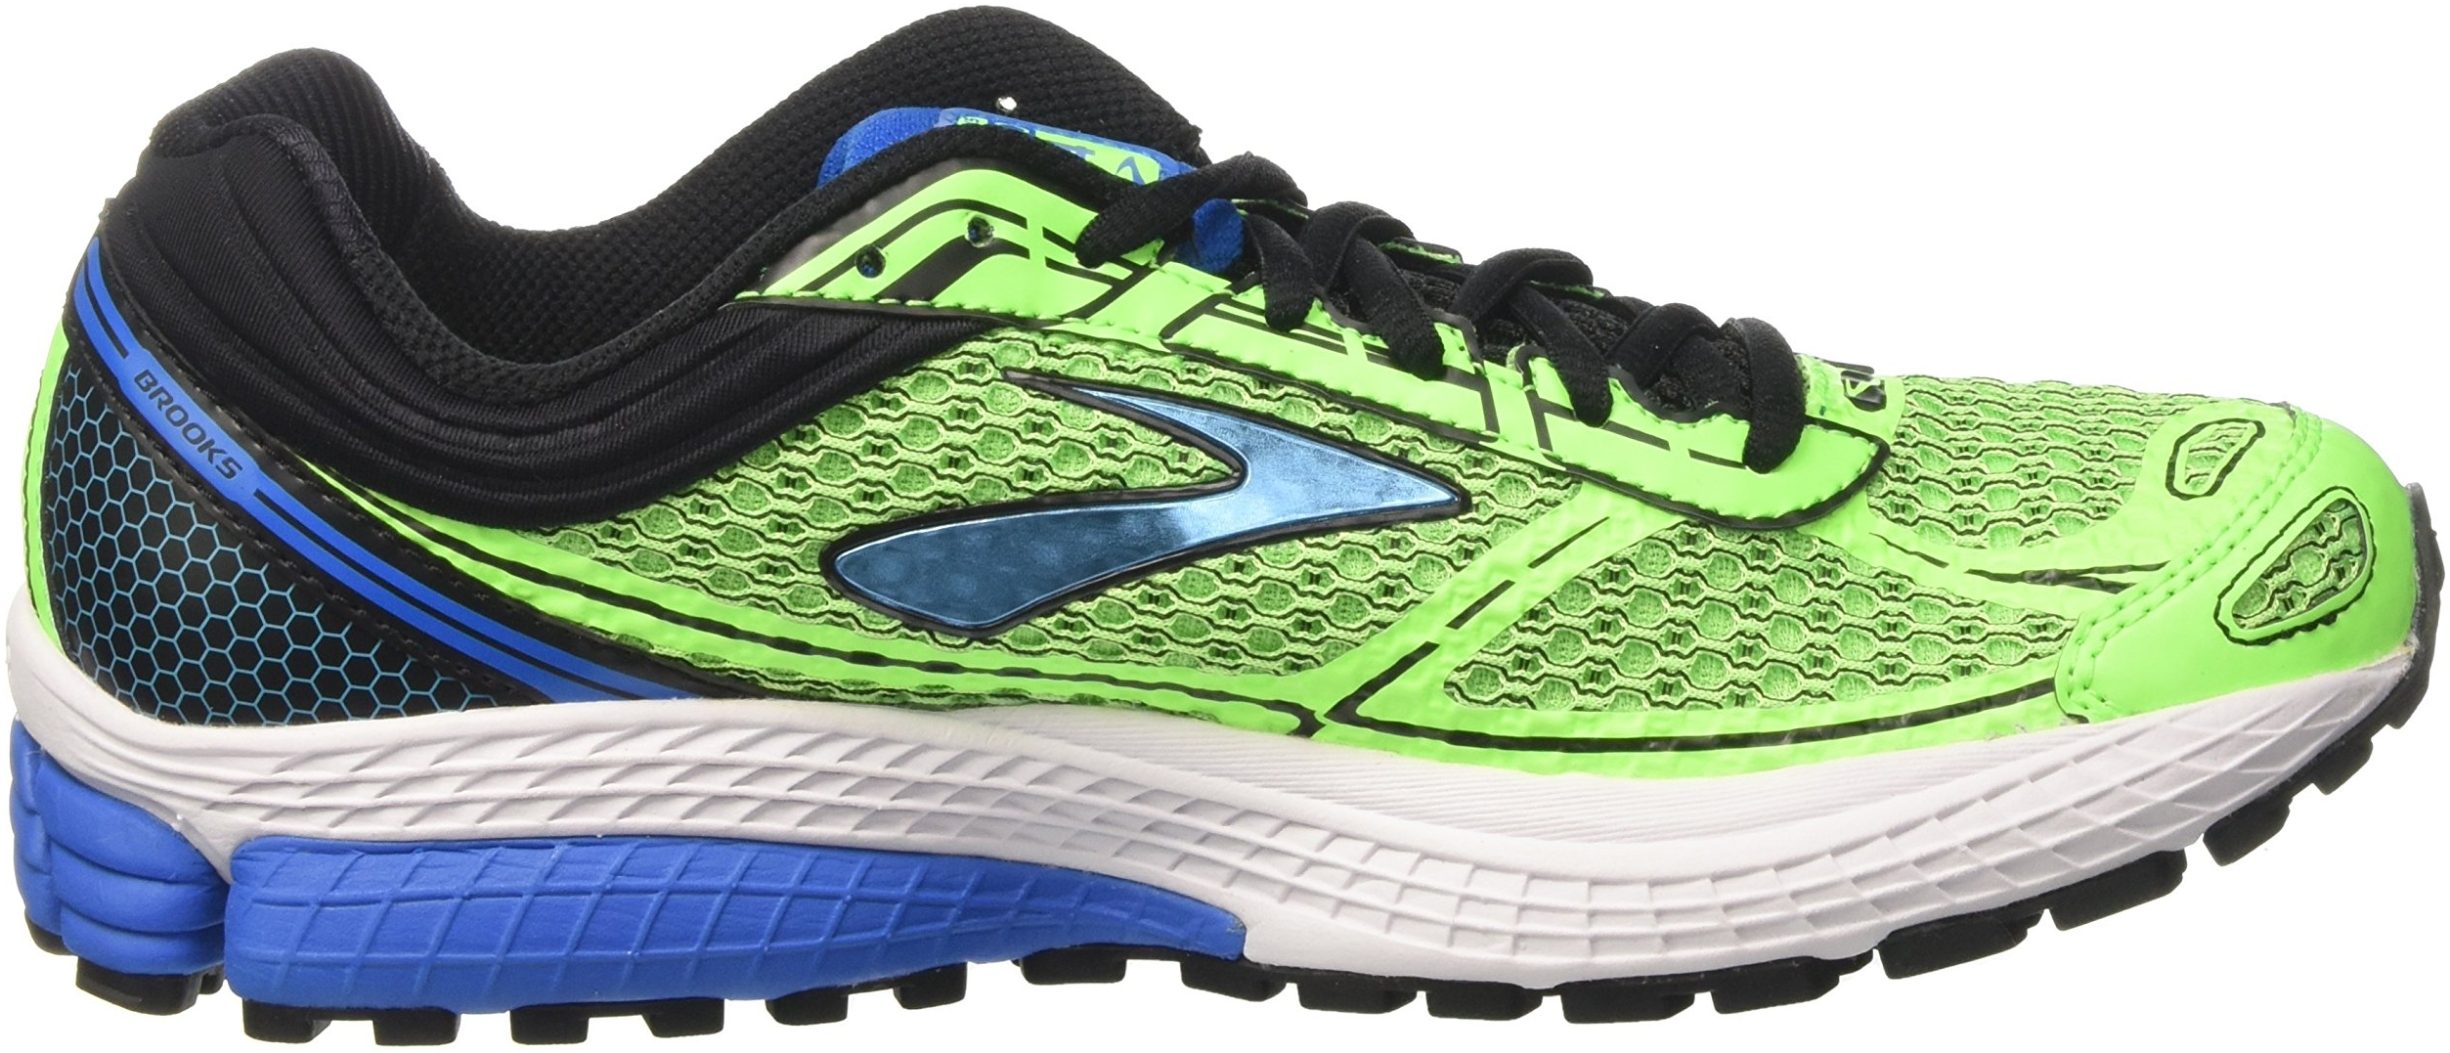 Only £93 + Review of Brooks Aduro 4 | RunRepeat